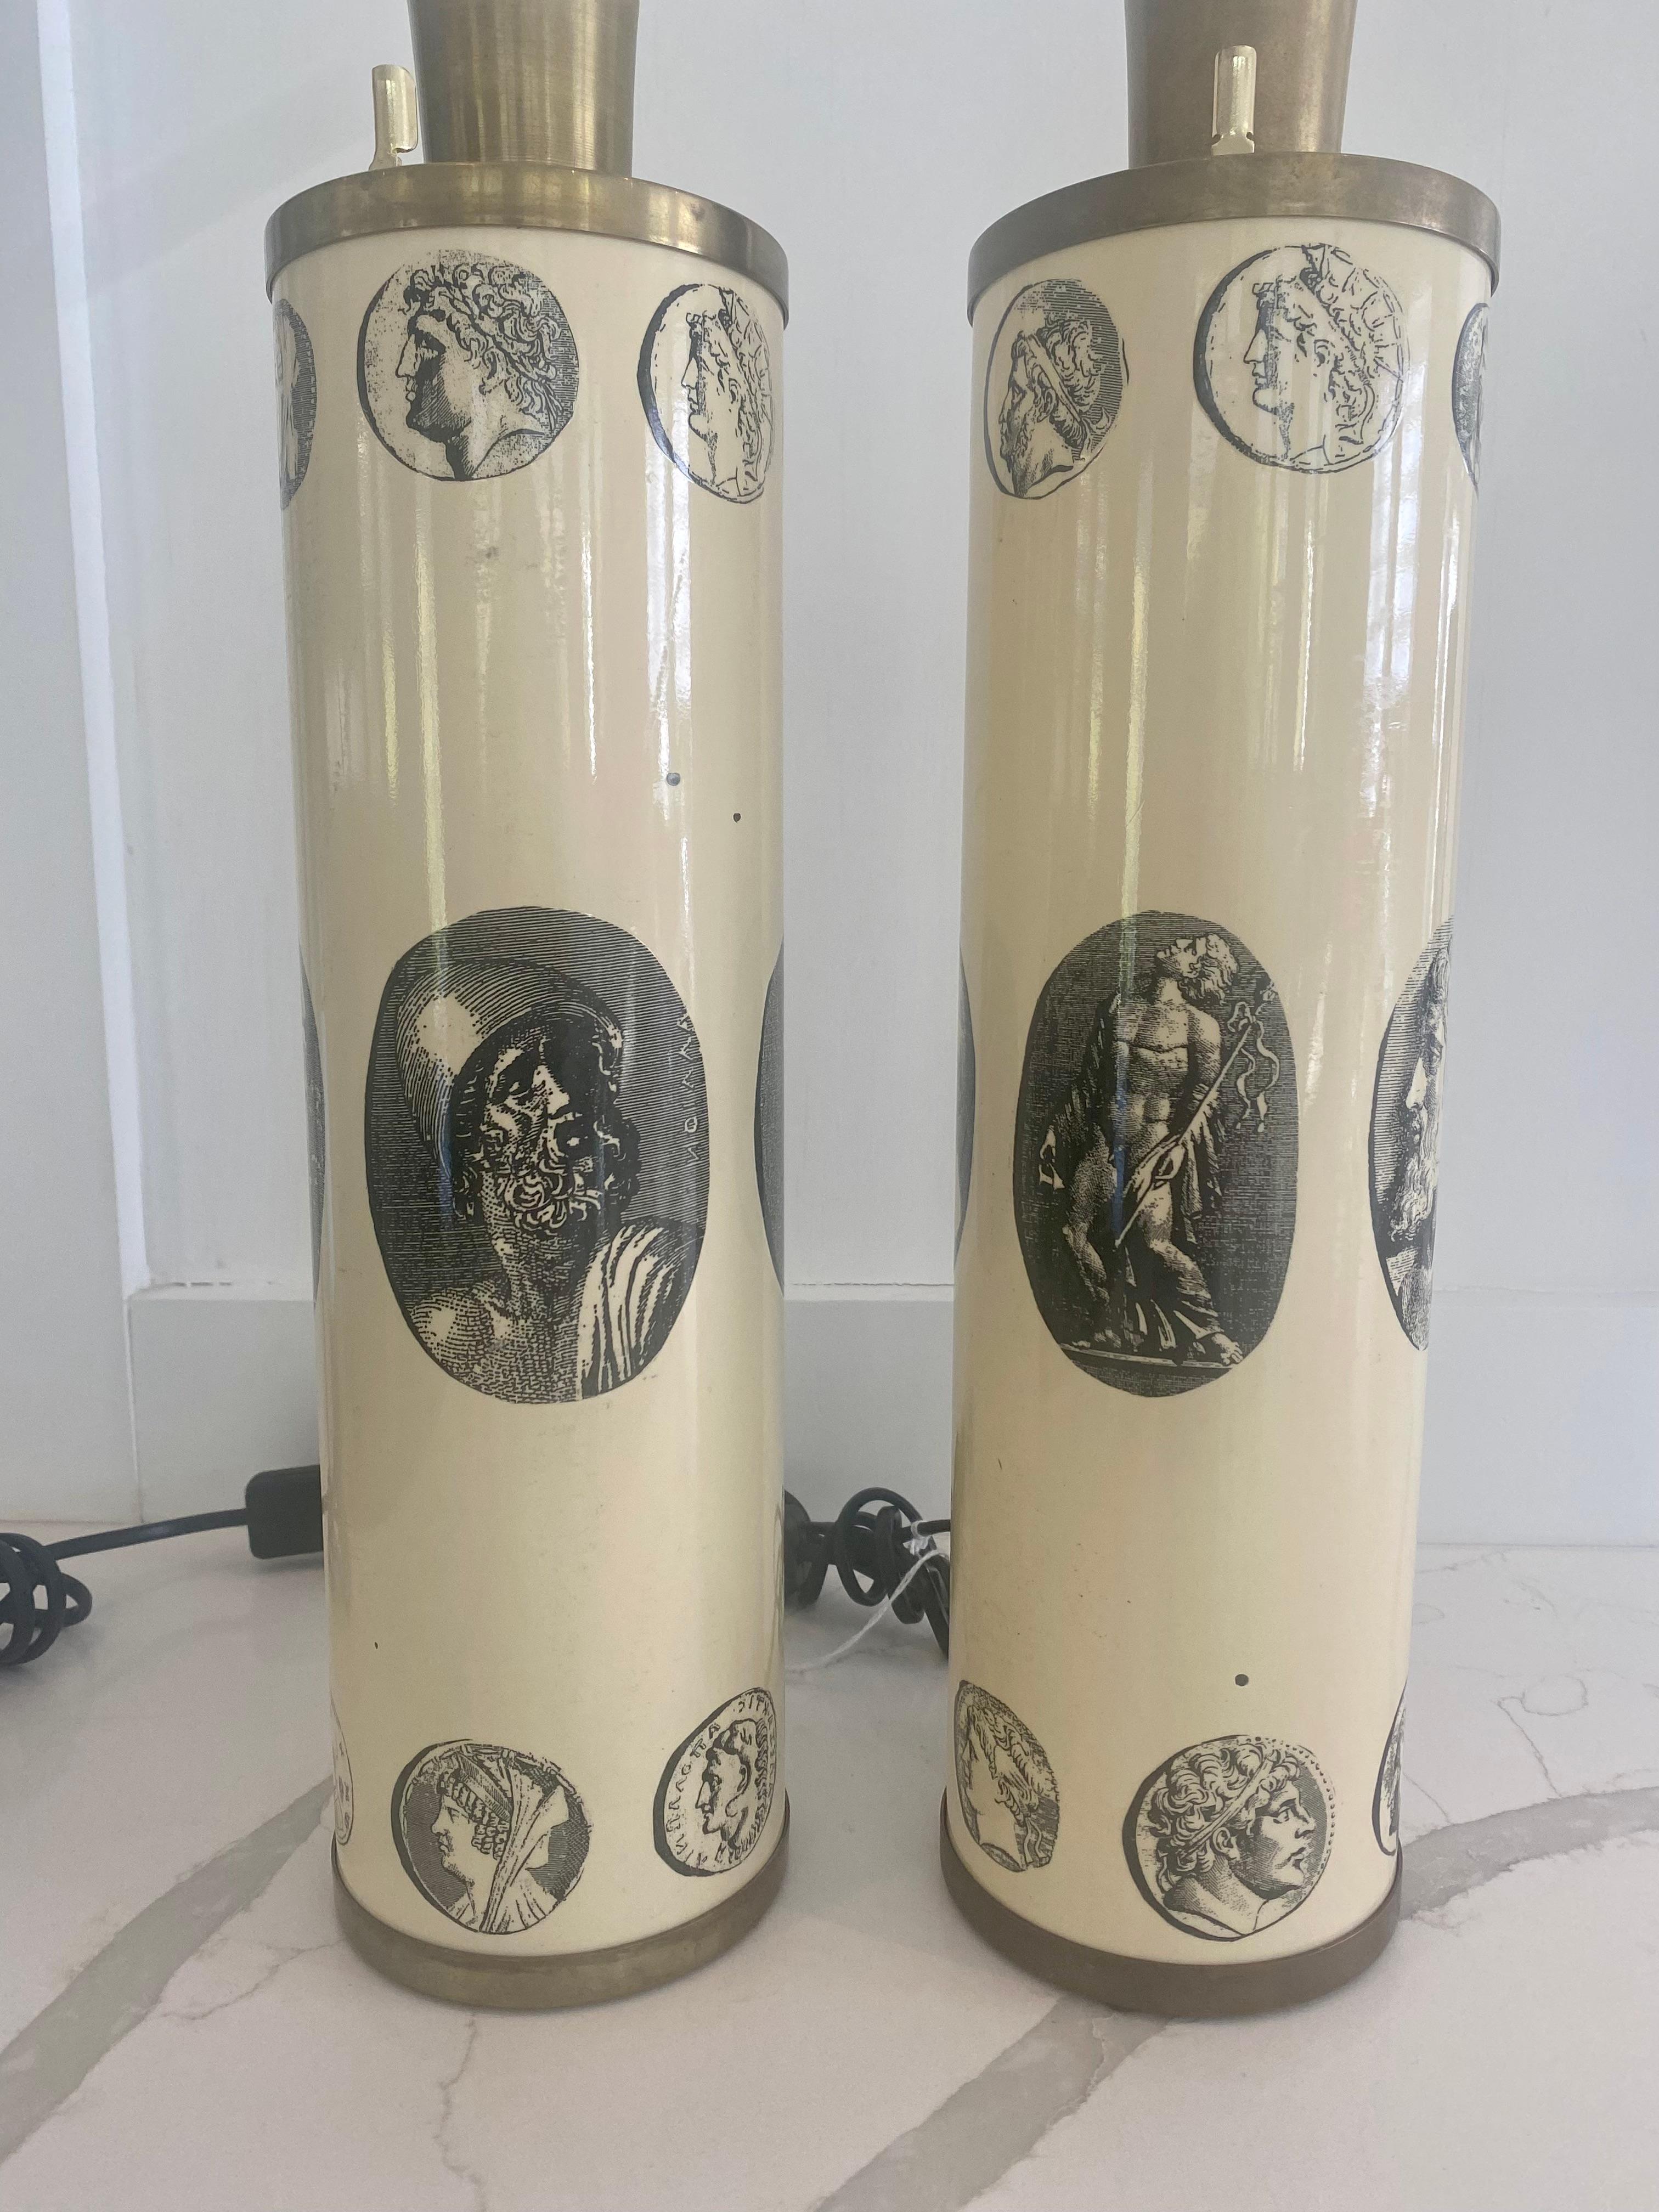 Pair of Classic Fornasetti lamps with black ground and white cameo pattern.
Note that lampshades not included...